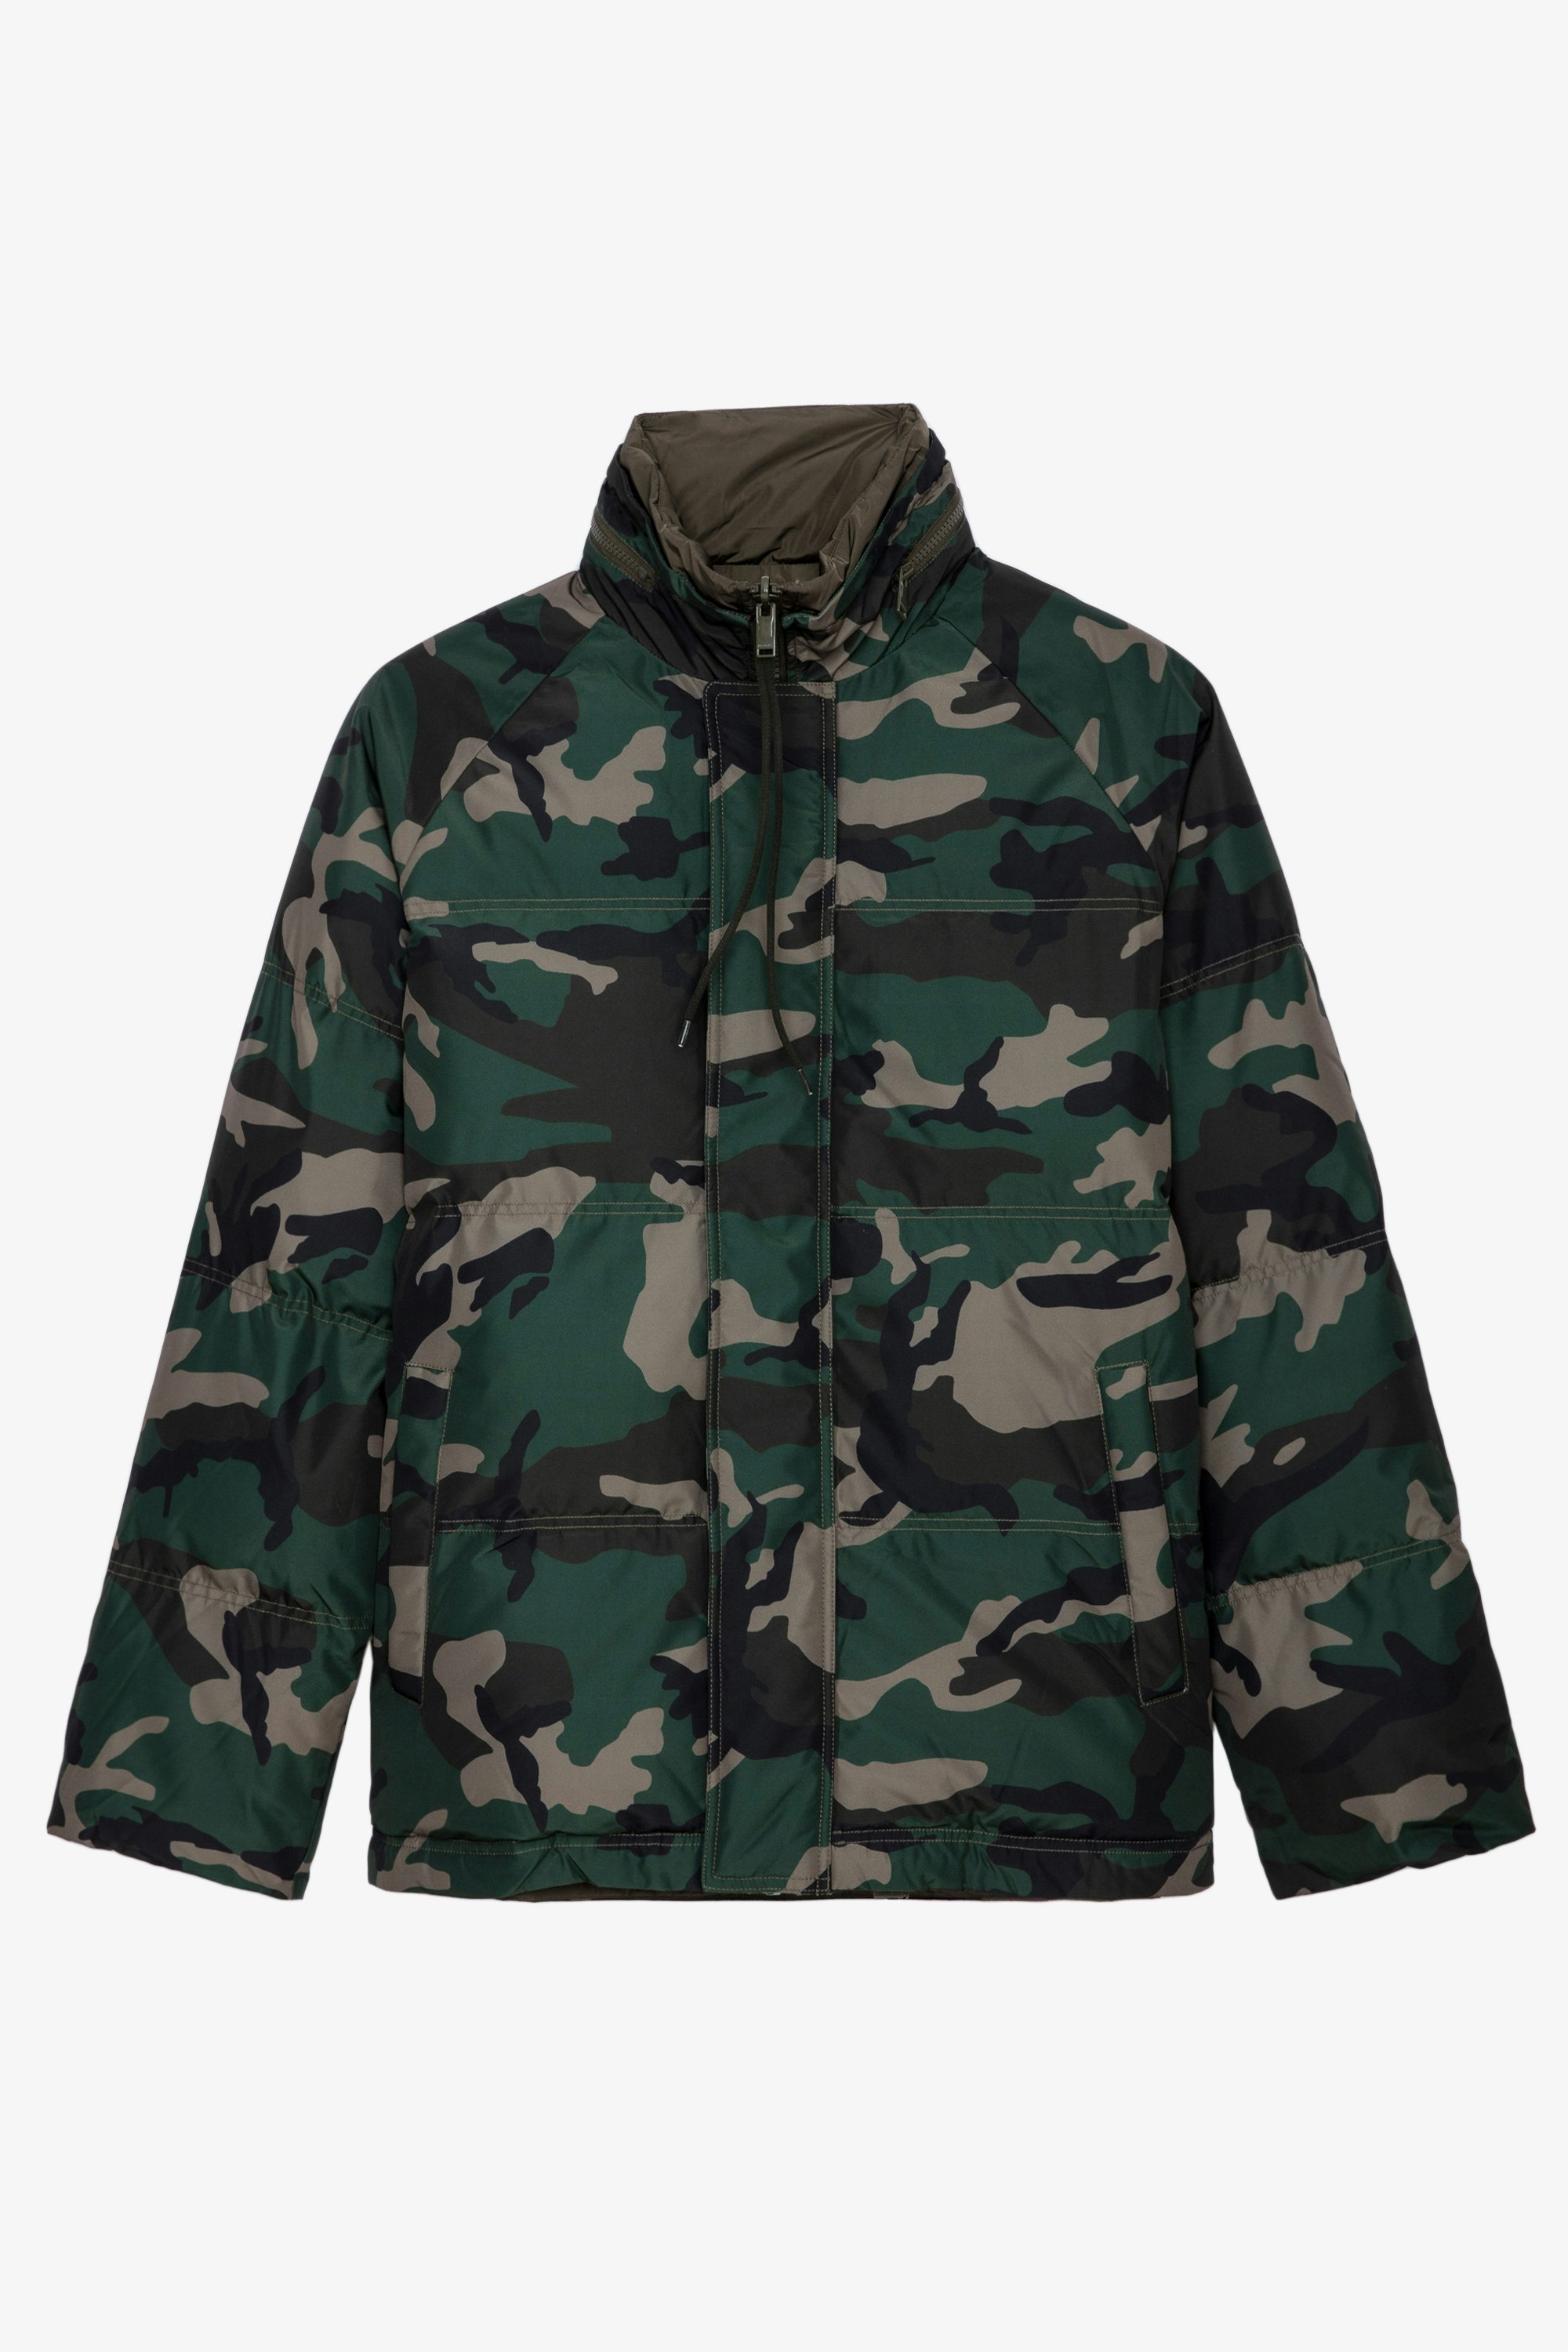 Bristol Down Jacket Men’s oversized khaki technical down jacket with camouflage print on one side and plain black on the other side